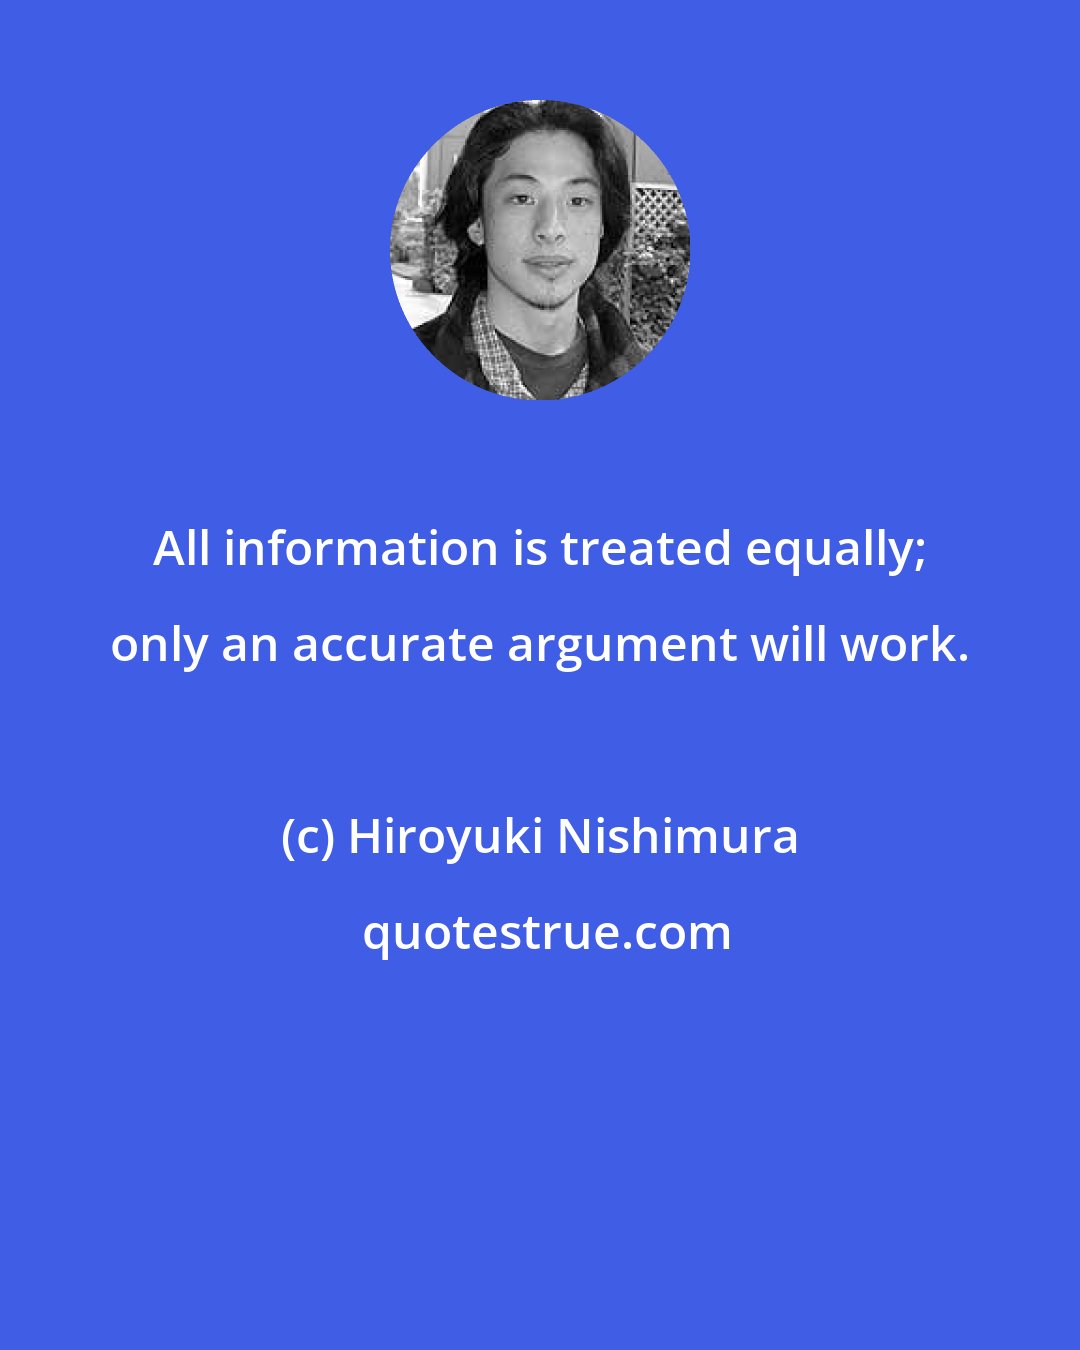 Hiroyuki Nishimura: All information is treated equally; only an accurate argument will work.